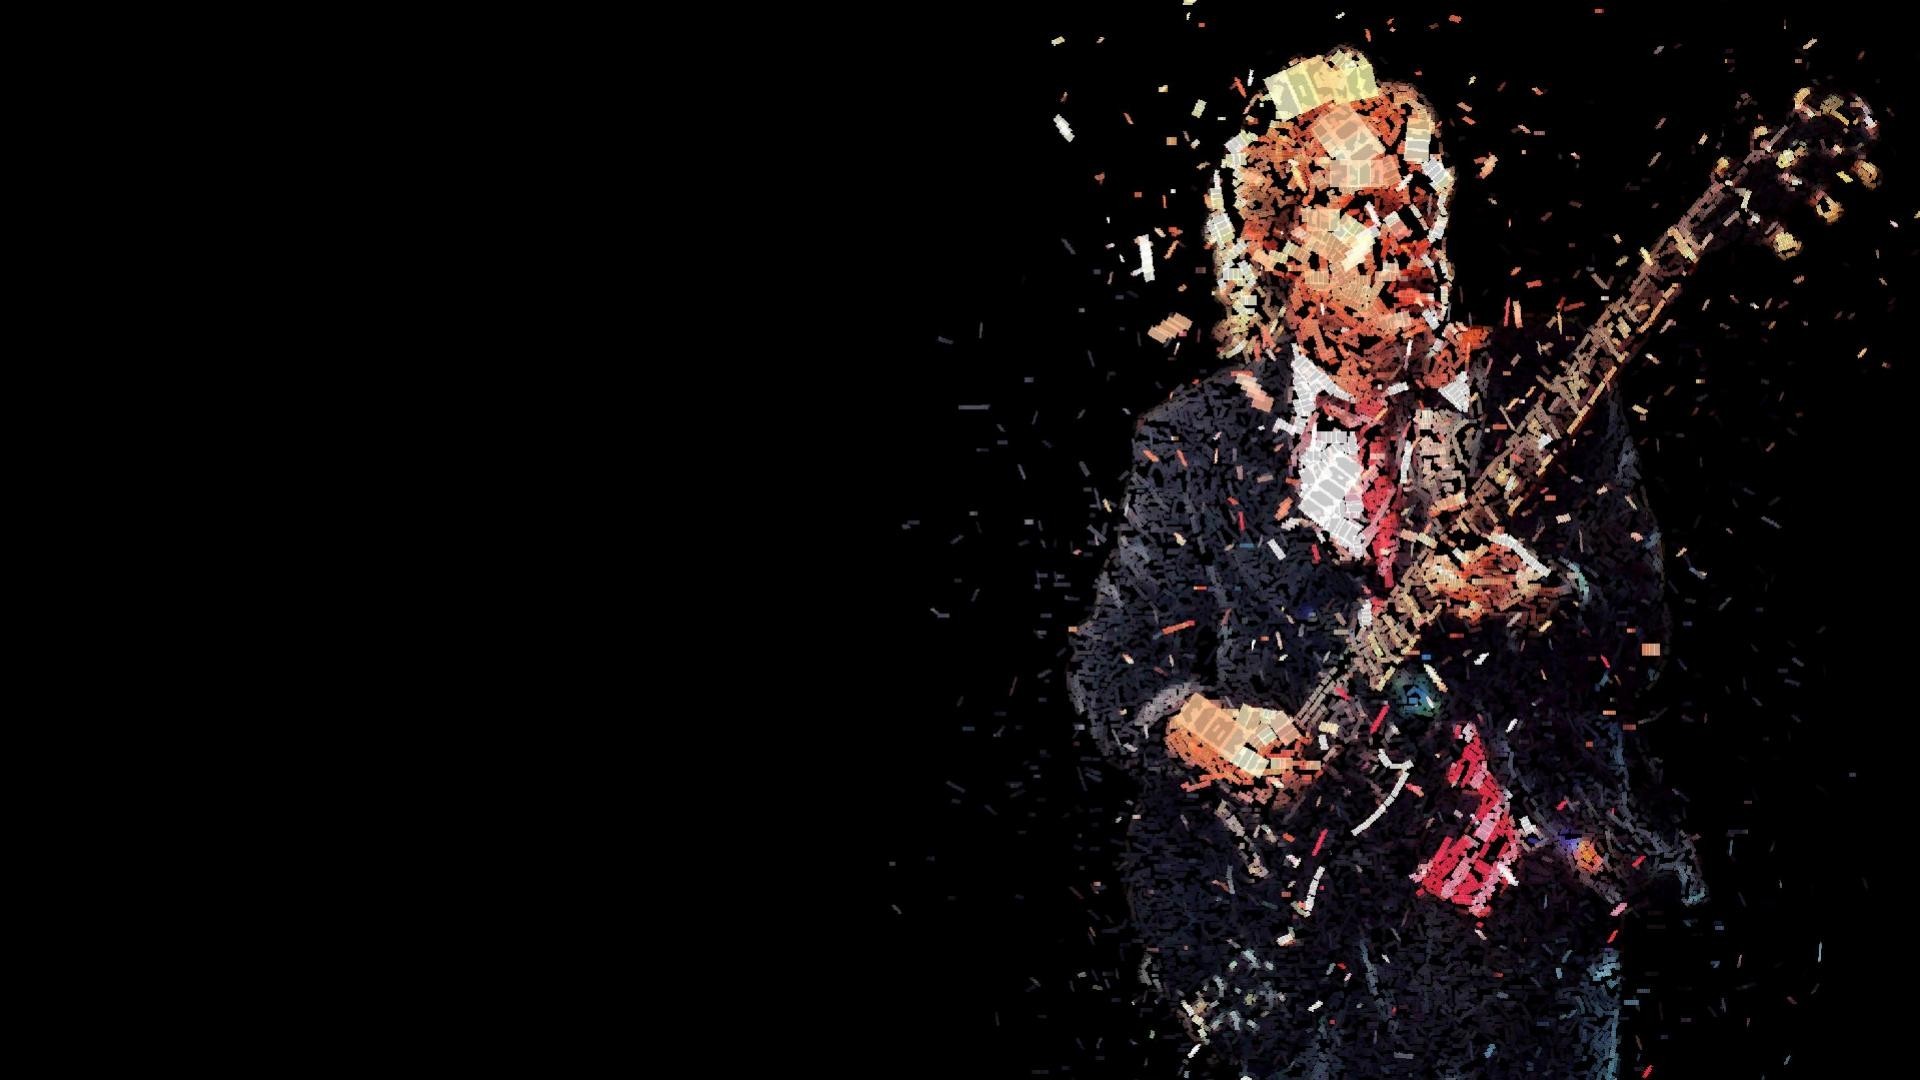 AC DC, Angus Young, Typographic Portraits Wallpaper